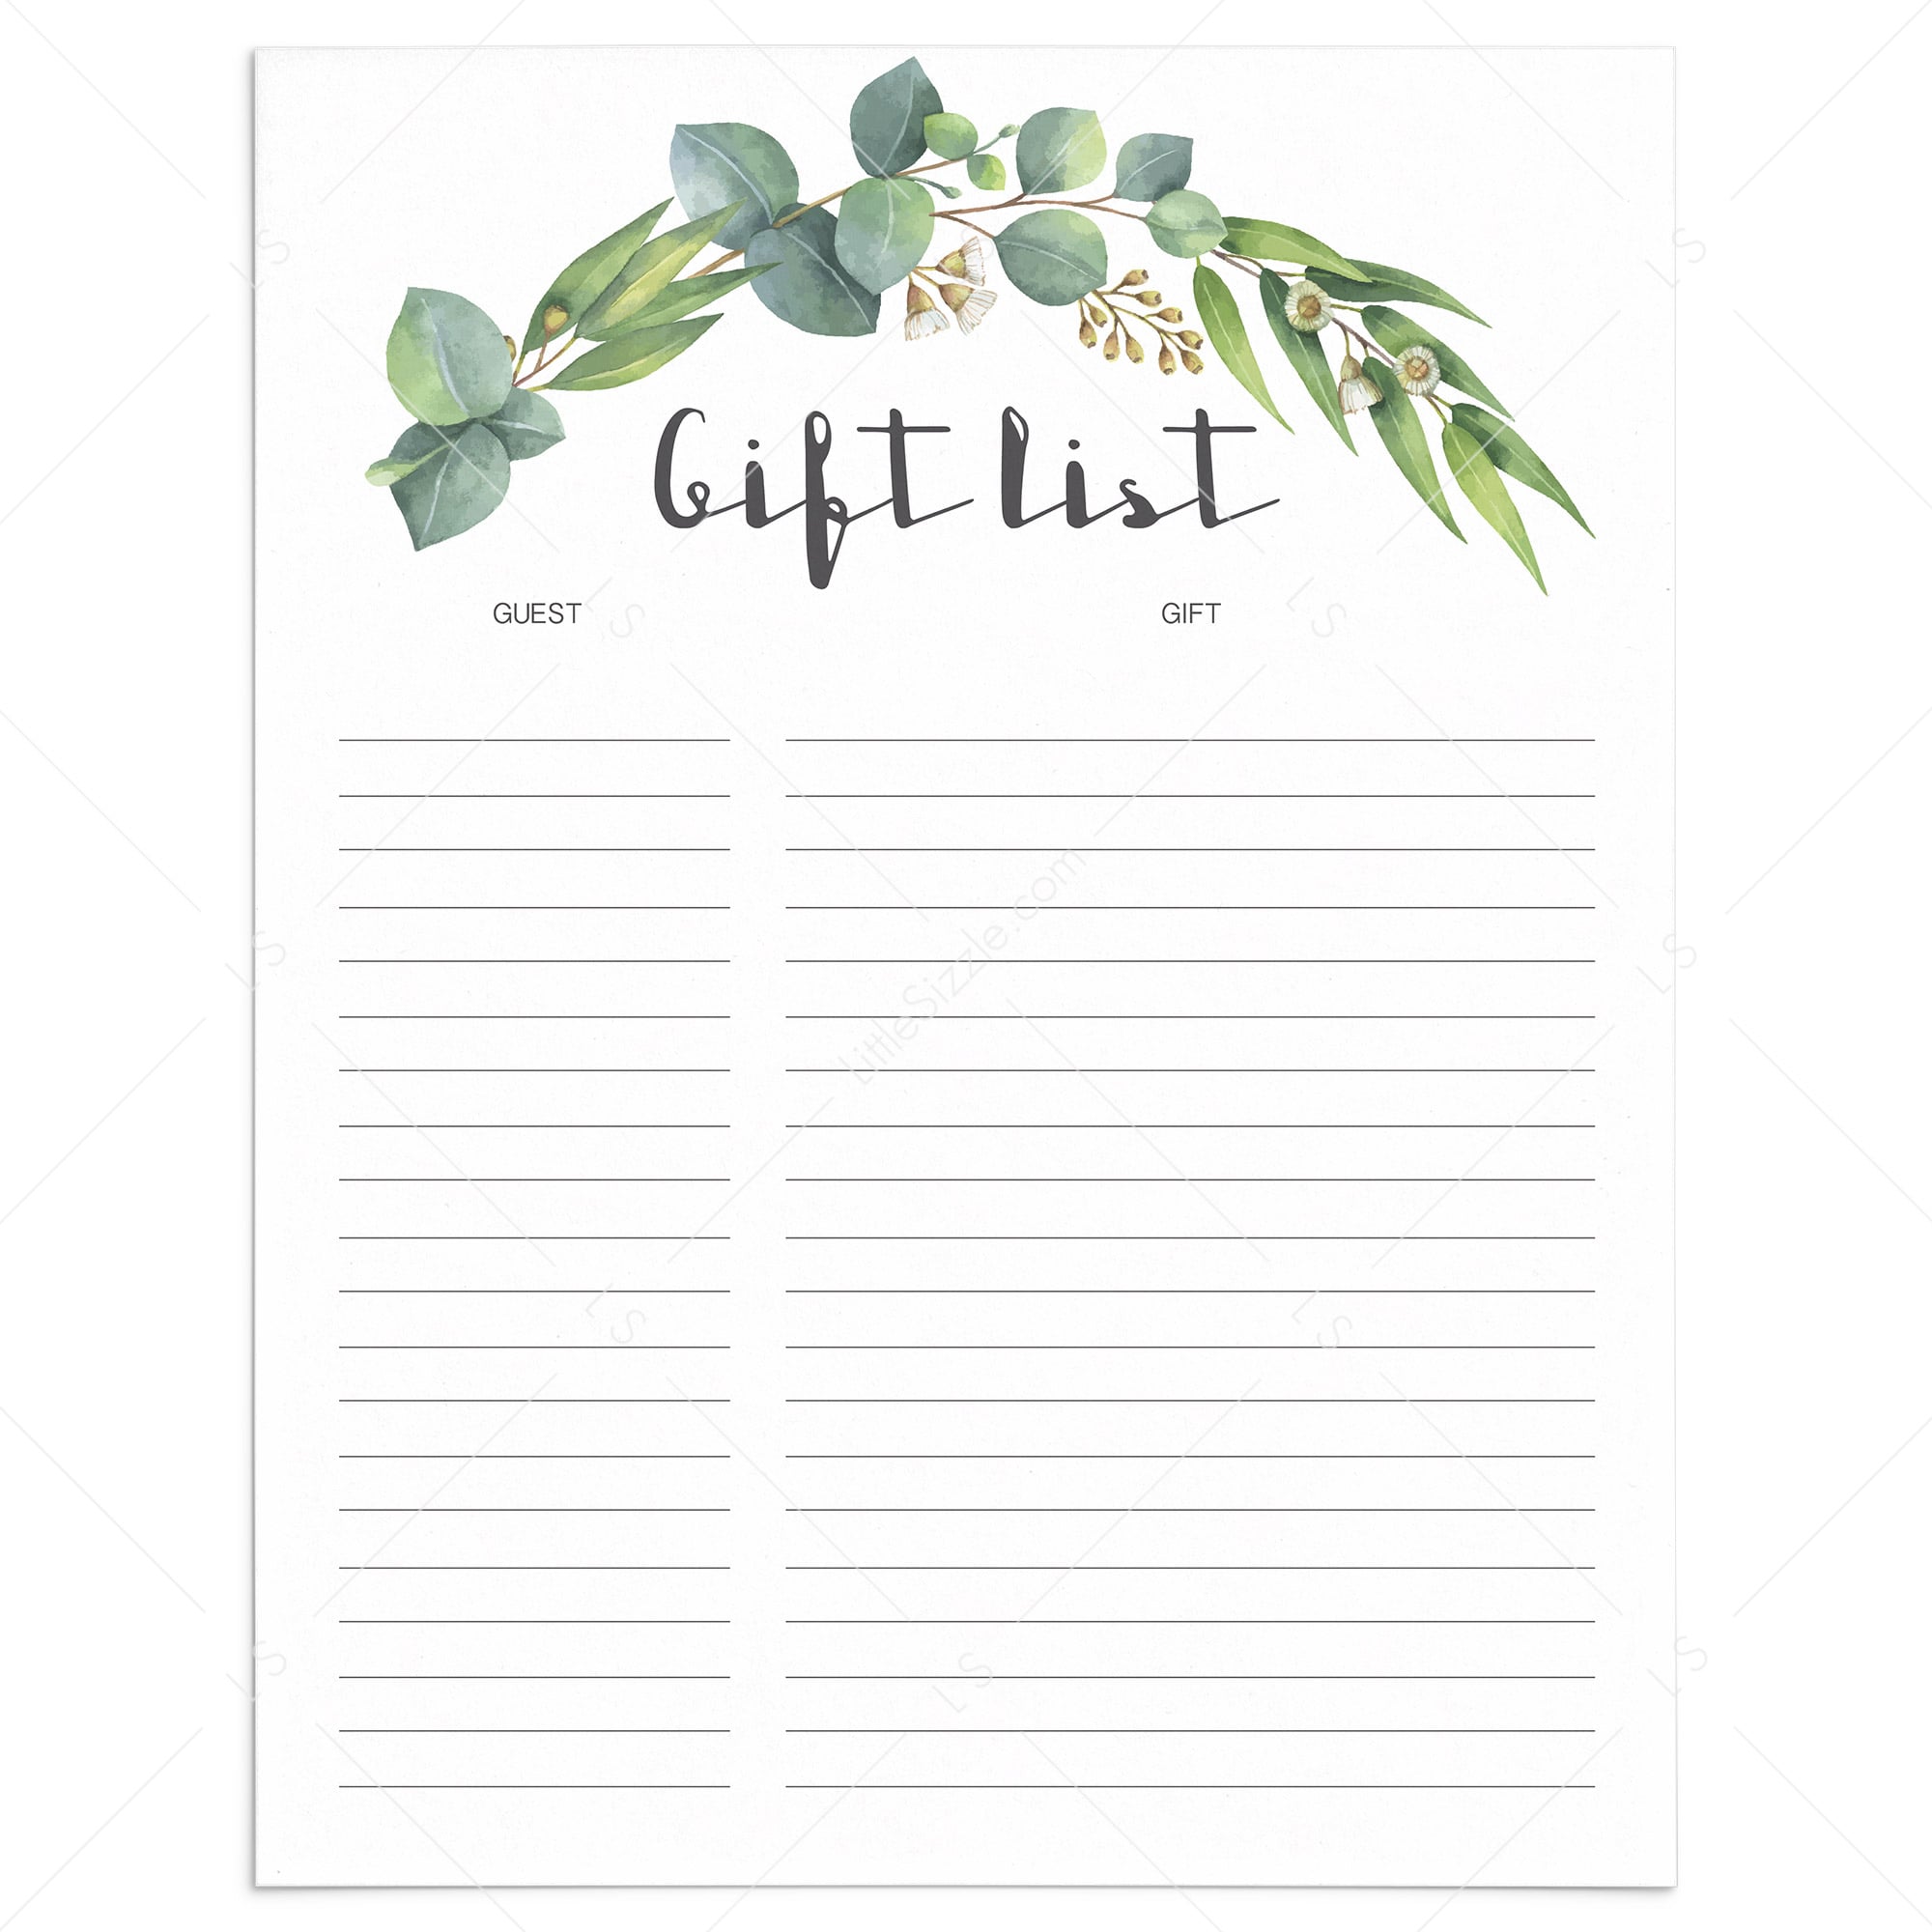 Botanical gift tracker printable Instant download PDF and JPG files